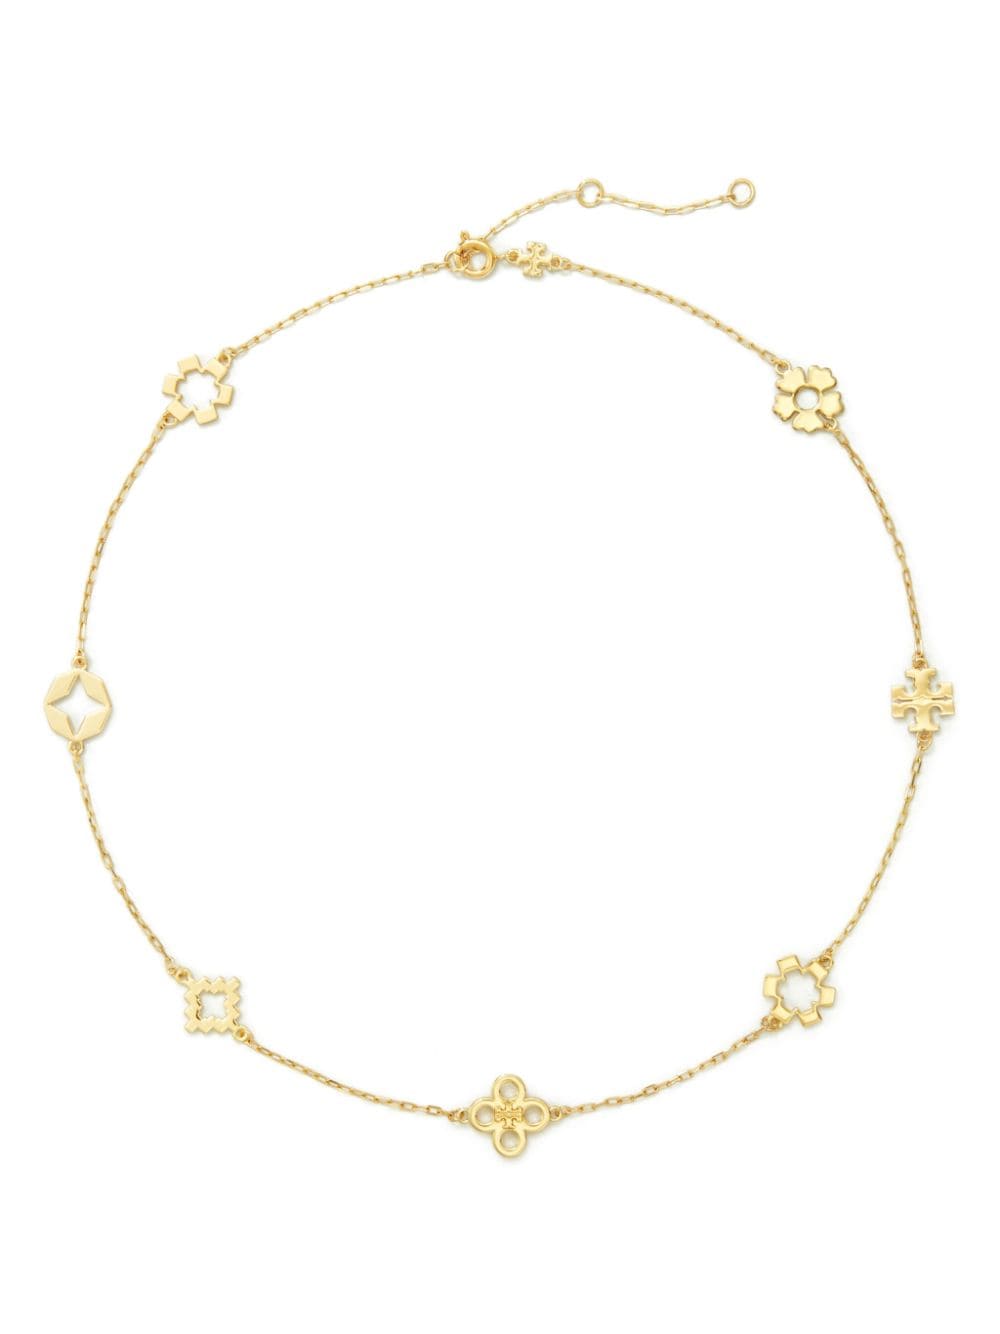 Tory Burch Kira Clover Necklace in White